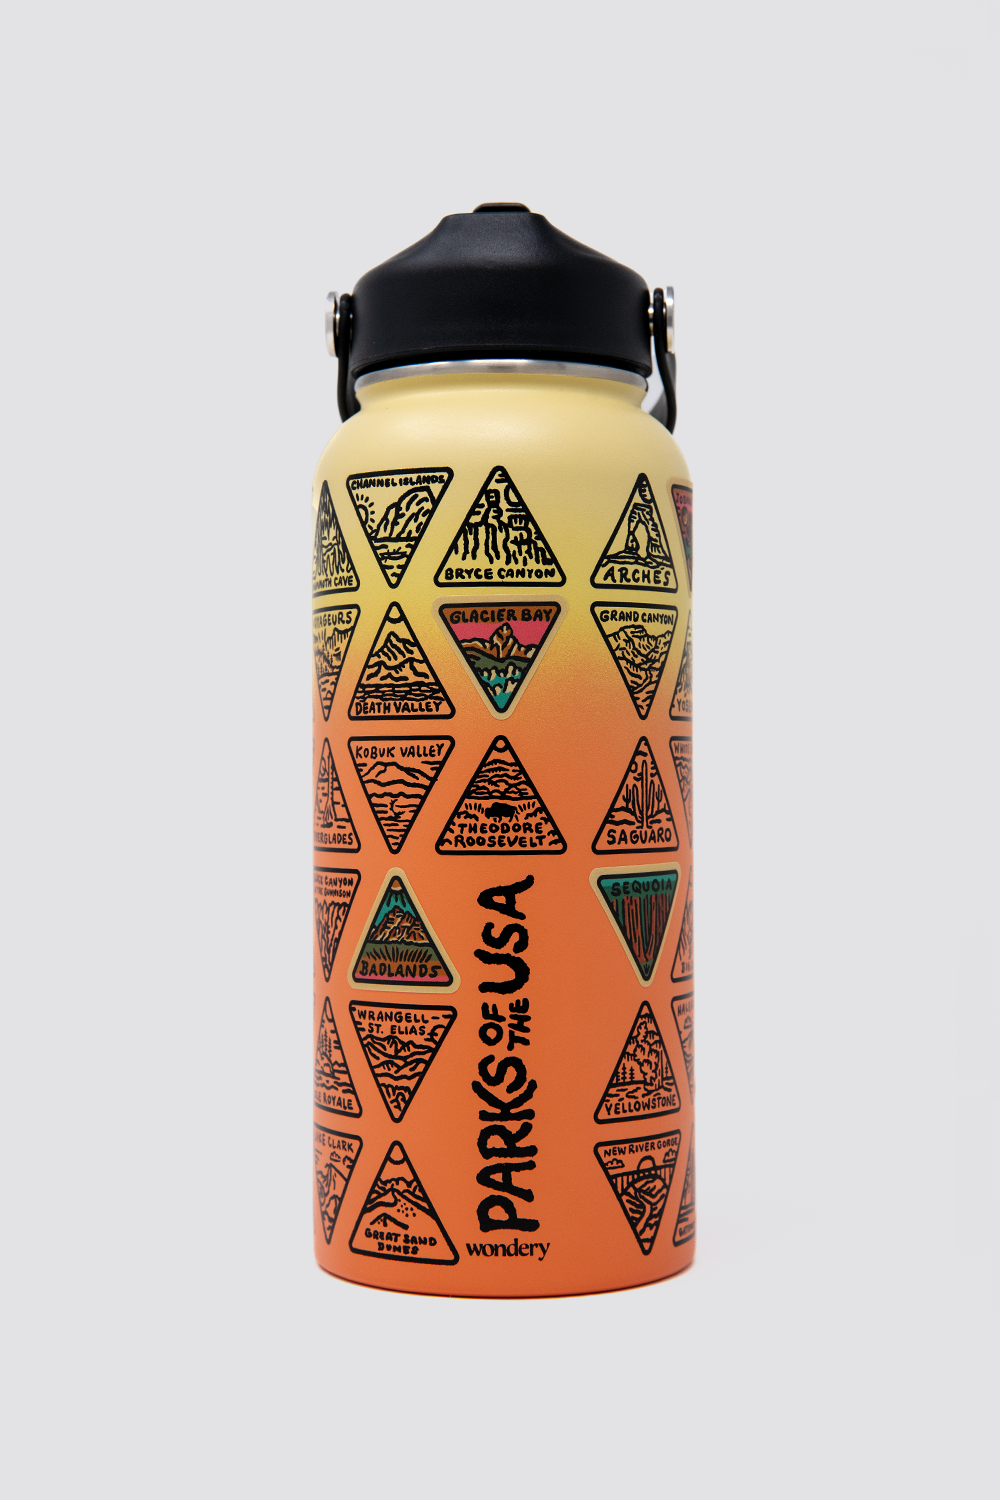 Hydro Flask National Park water bottles: New limited-edition